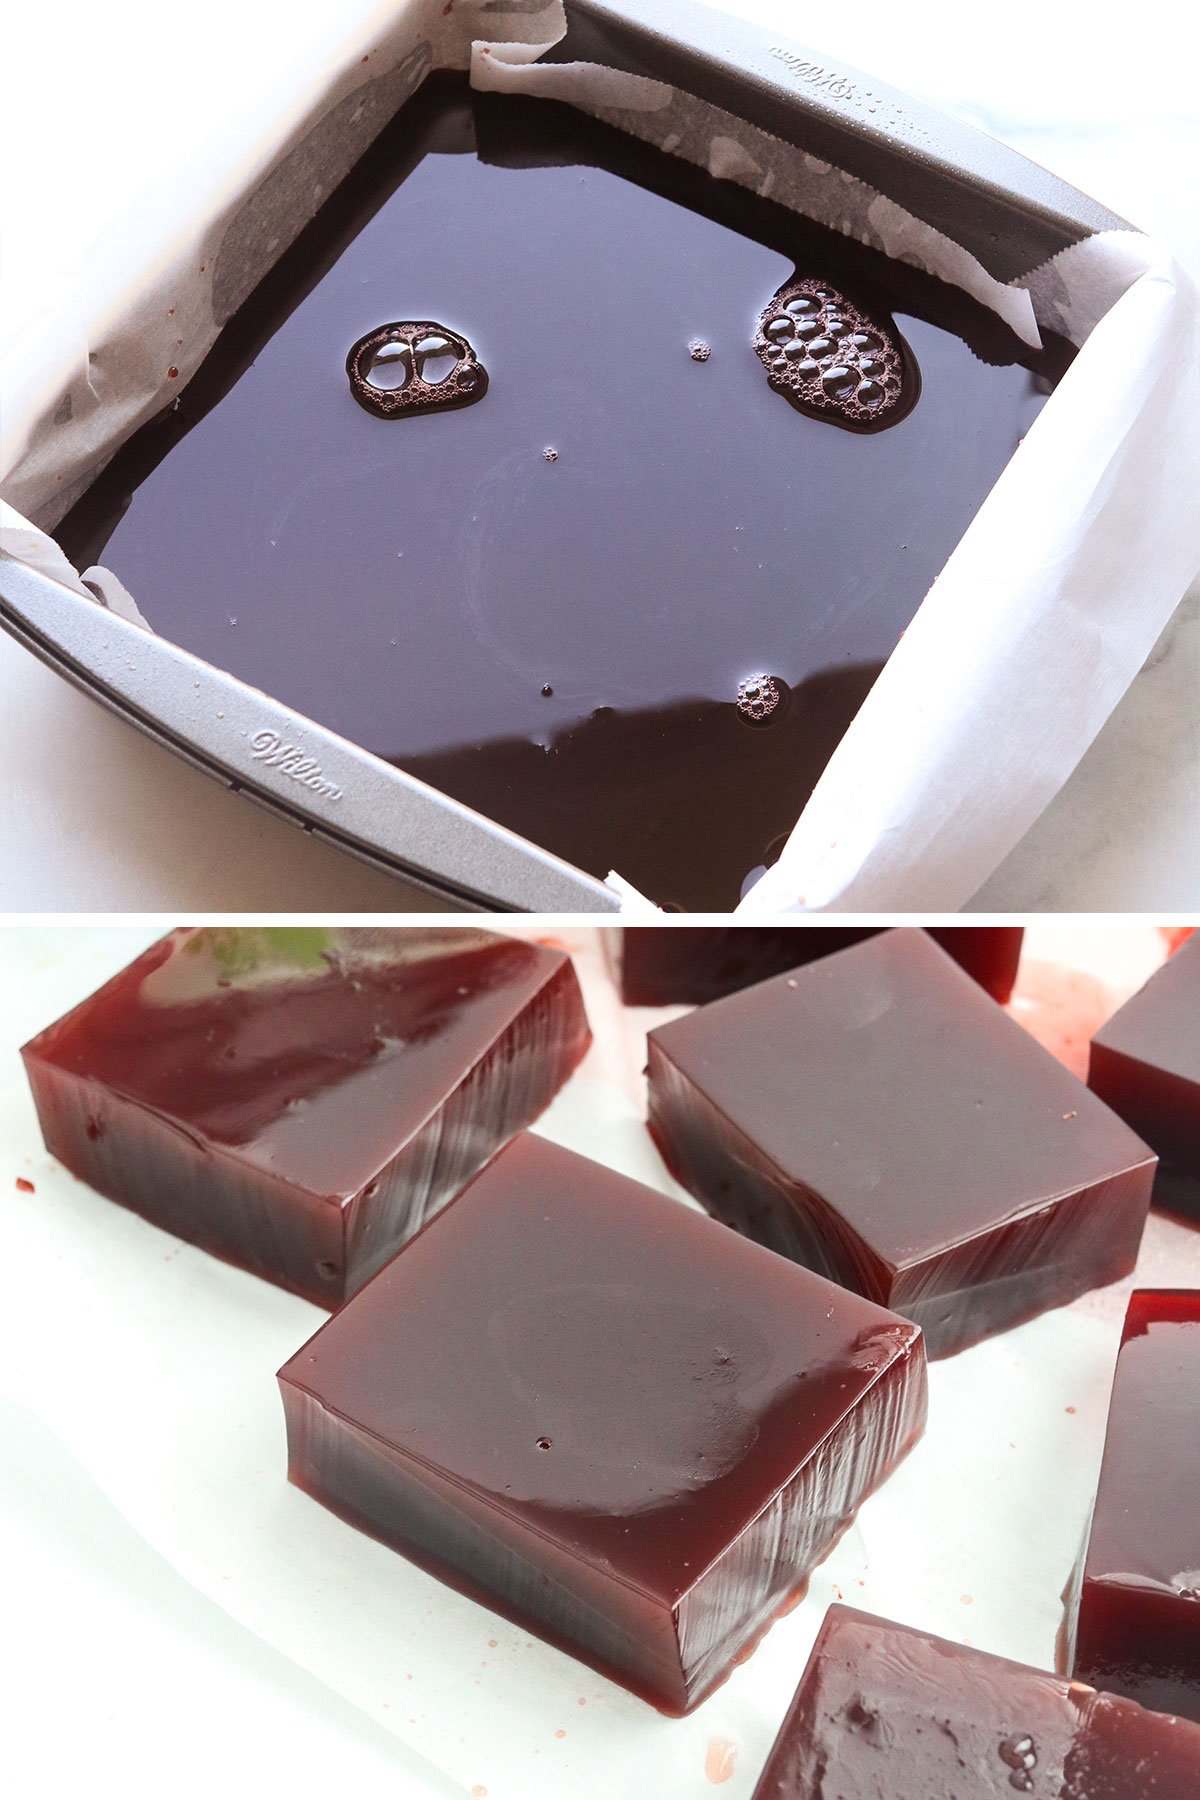 jello chilled in a pan and sliced into squares. 